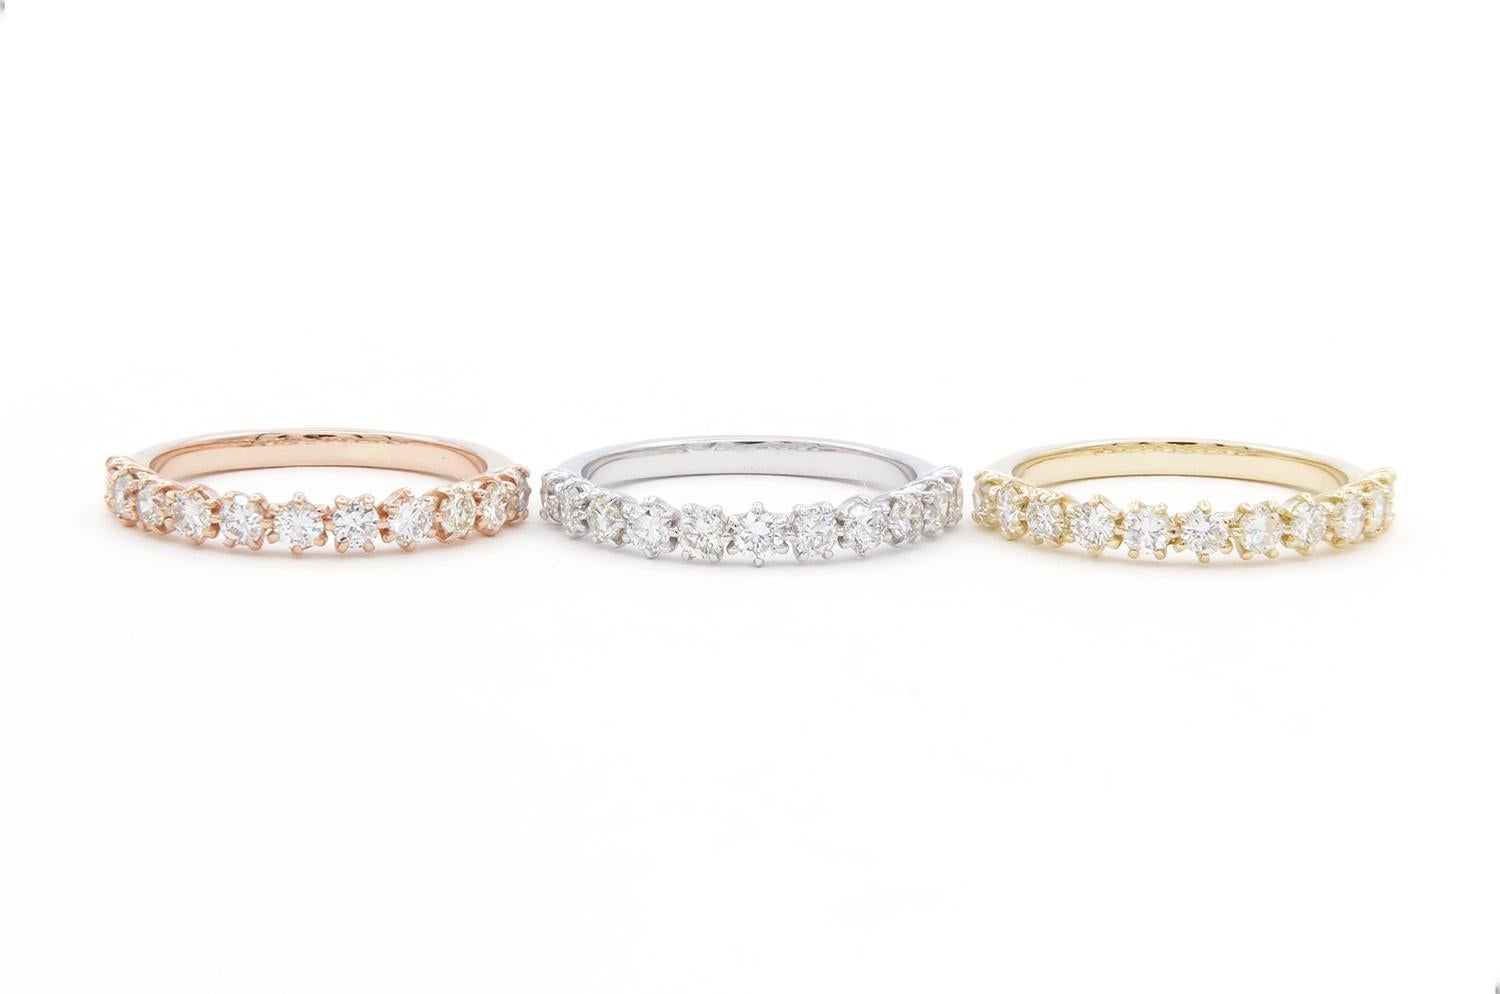 14k White Yellow & Rose Gold Diamond Stacking Fashion Rings 1.55ctw G-H/VS-SI For Sale 2